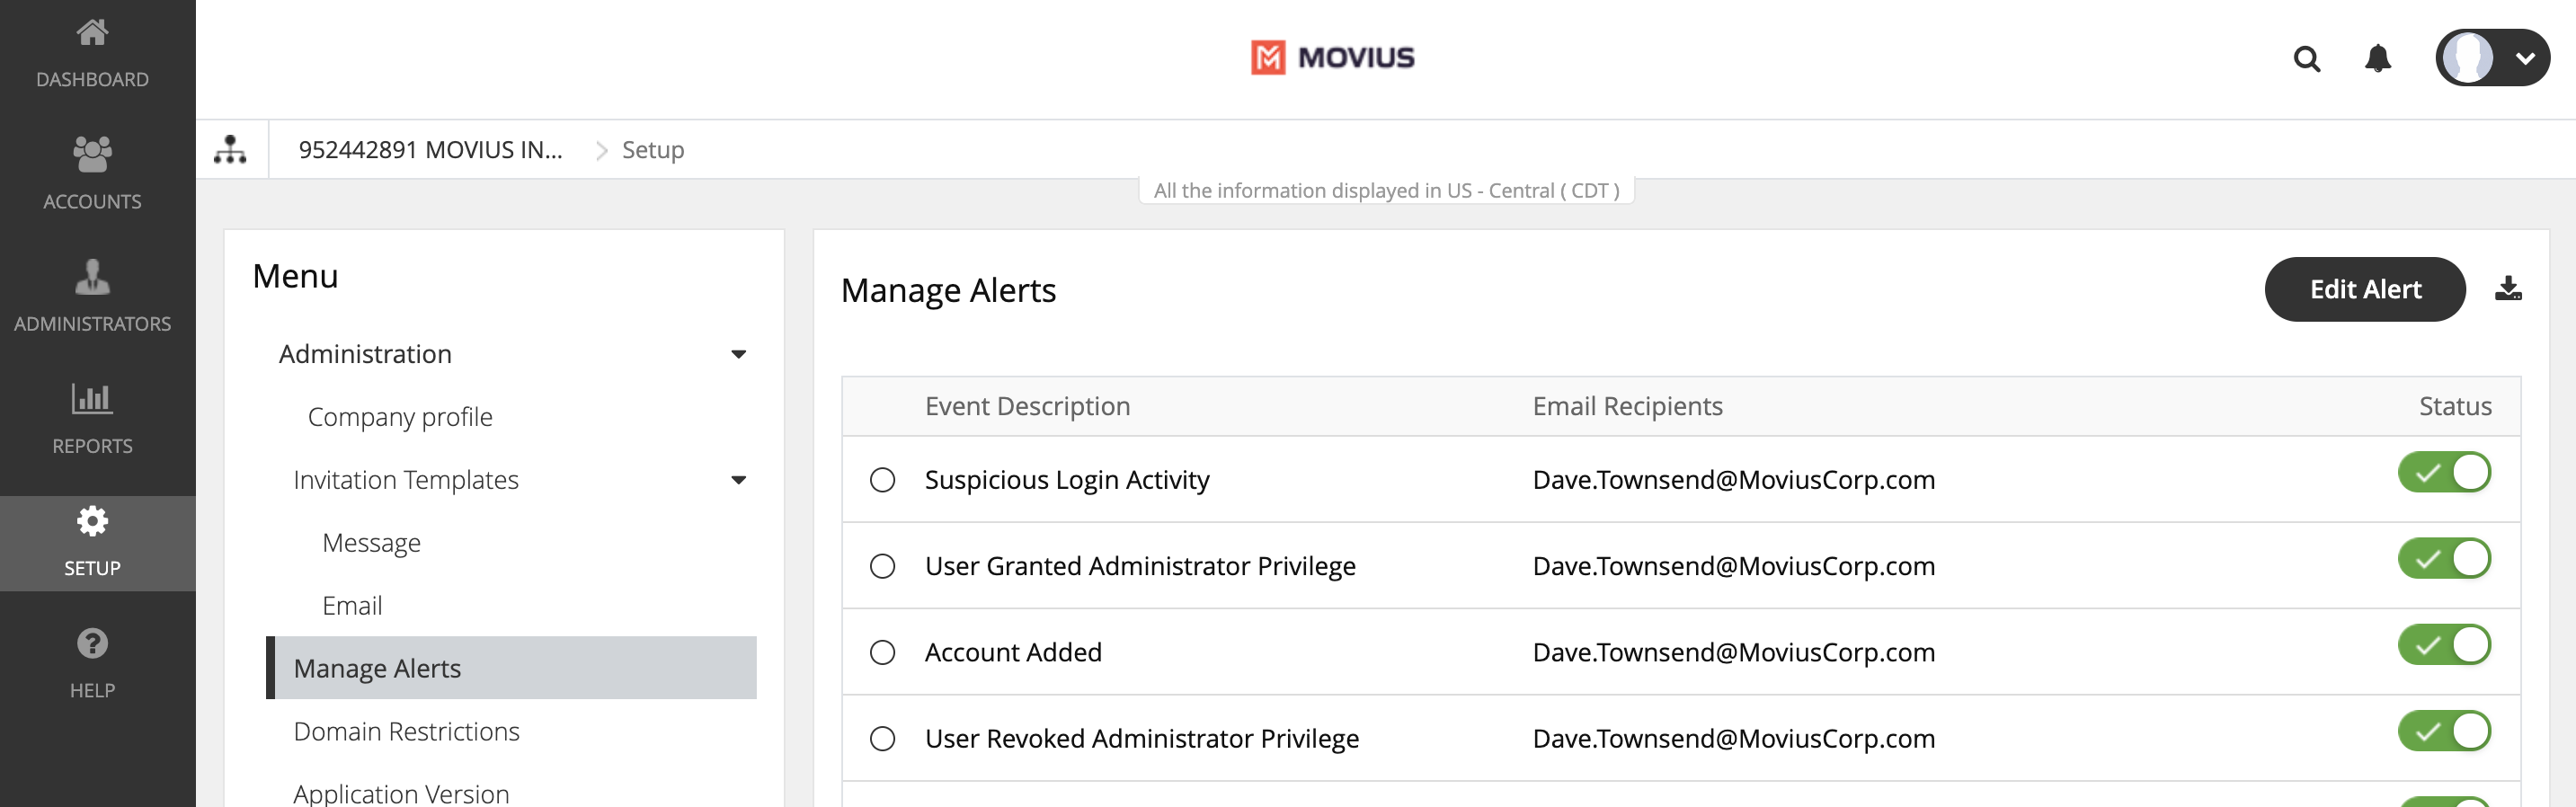 Manage Alerts screen